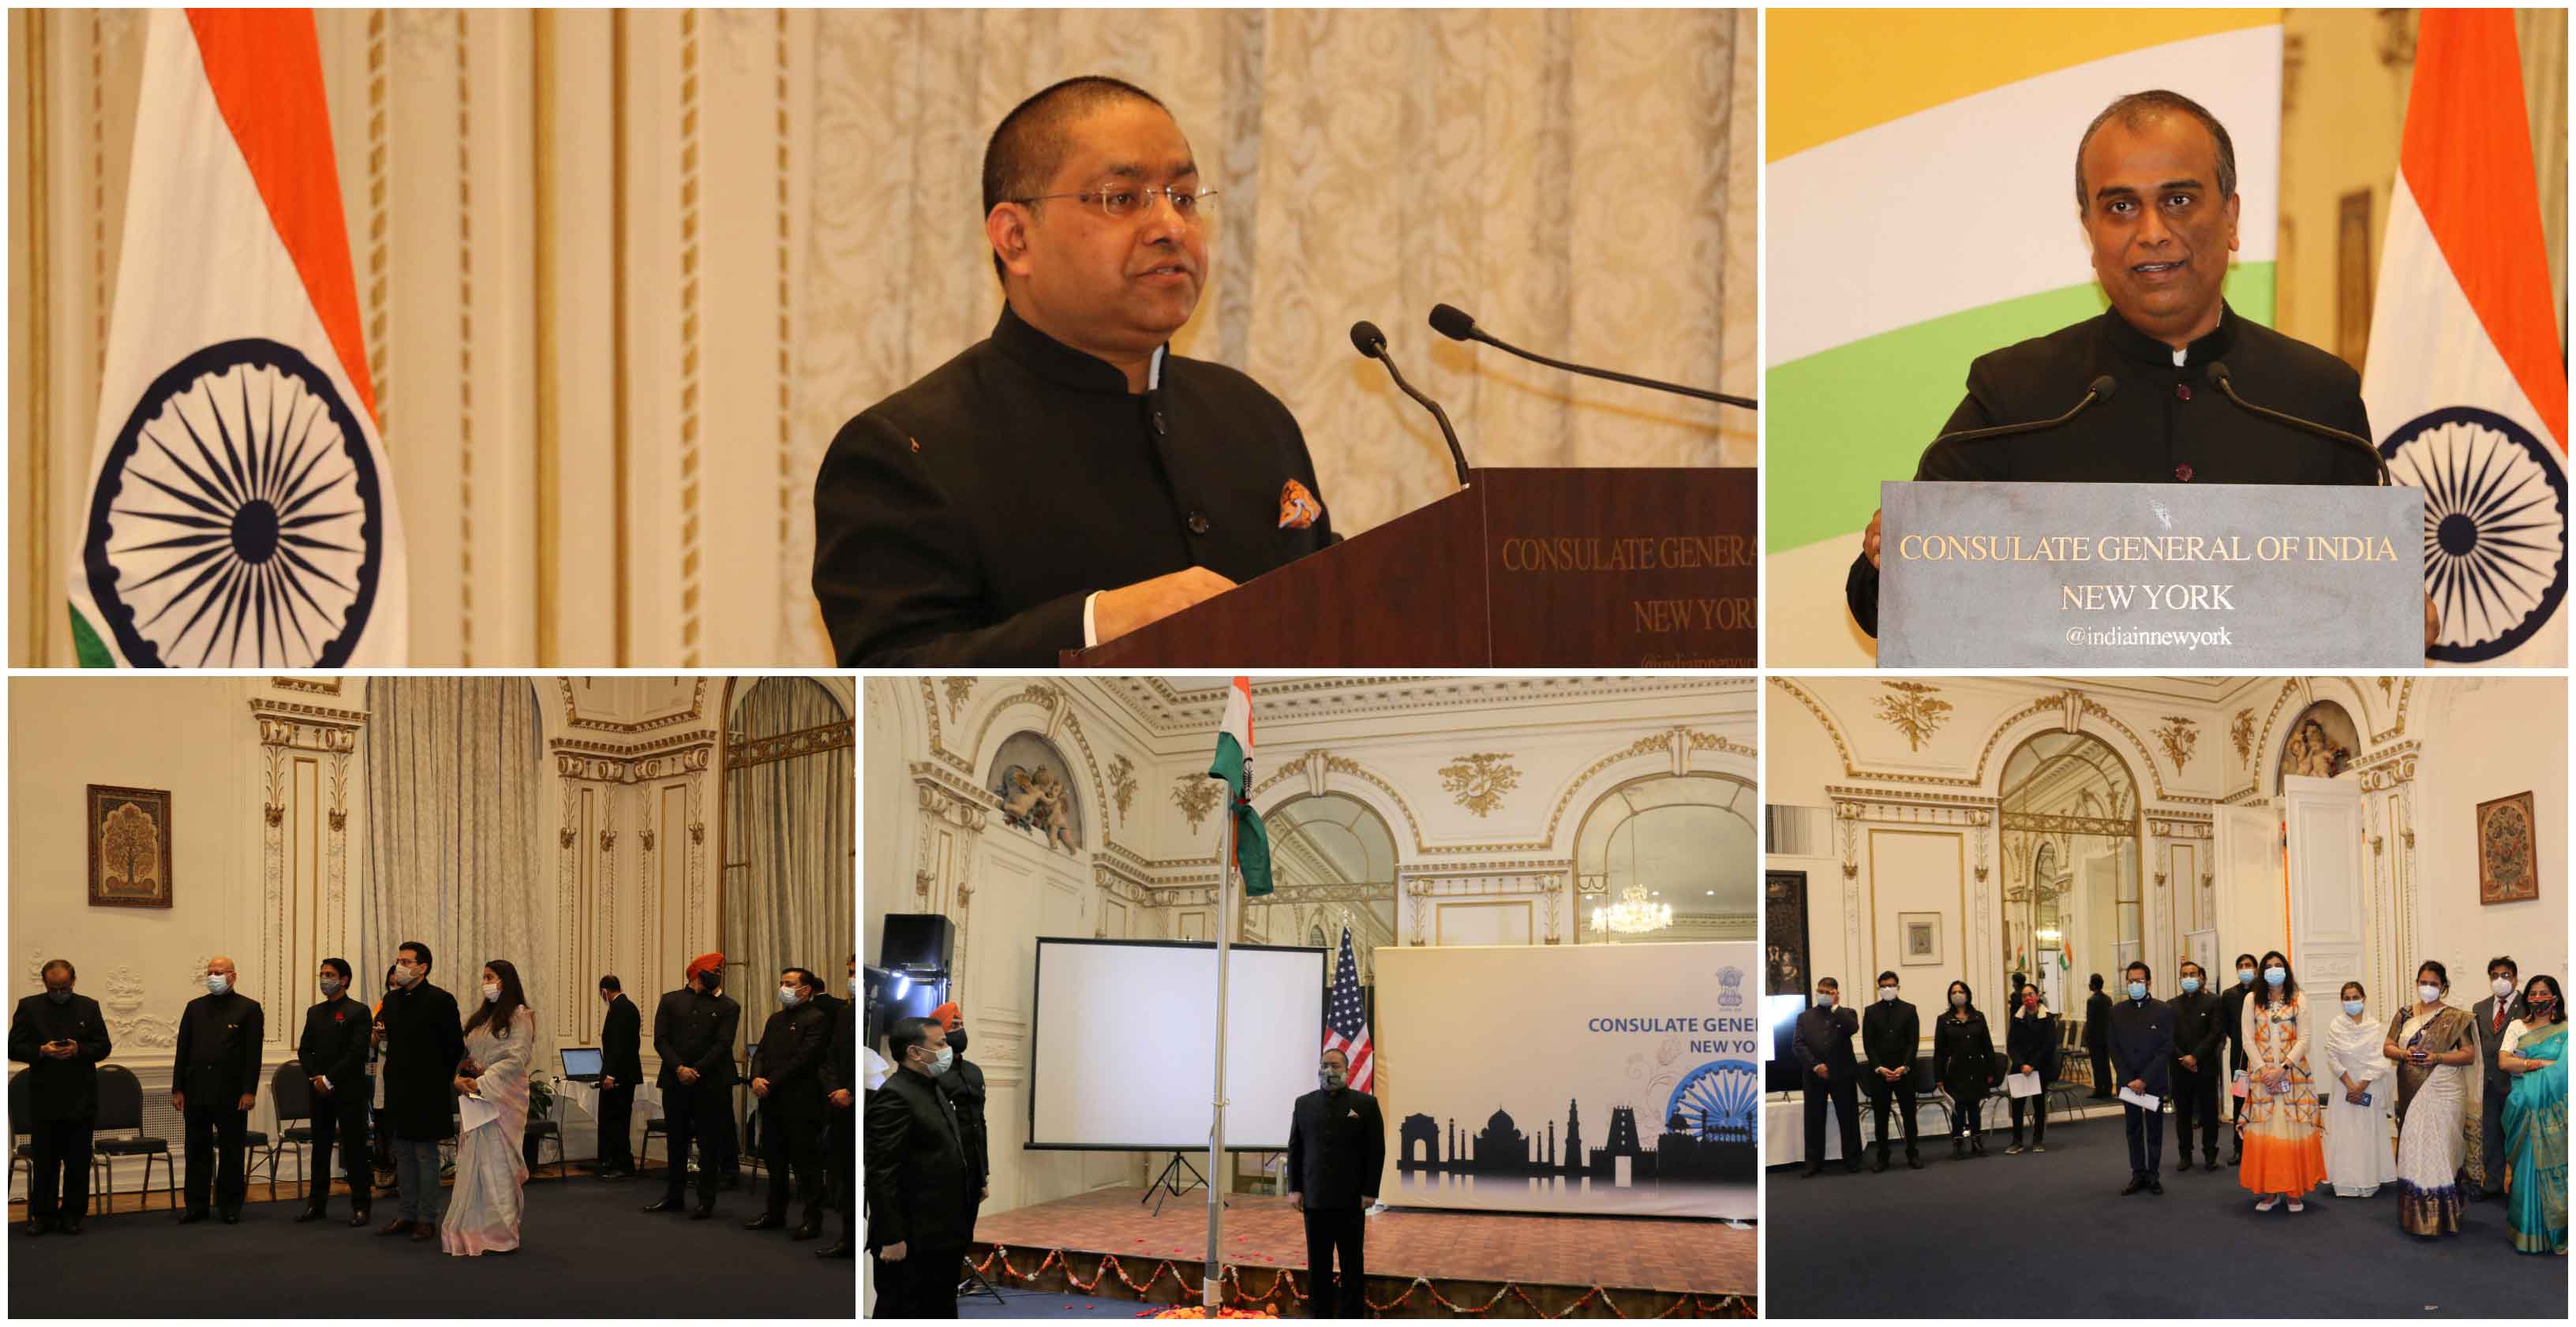  Consulate General of India, New York celebrated 72nd Republic Day at the Consulate premises. Consul General hoisted the national flag and read out the President of India's address to the nation